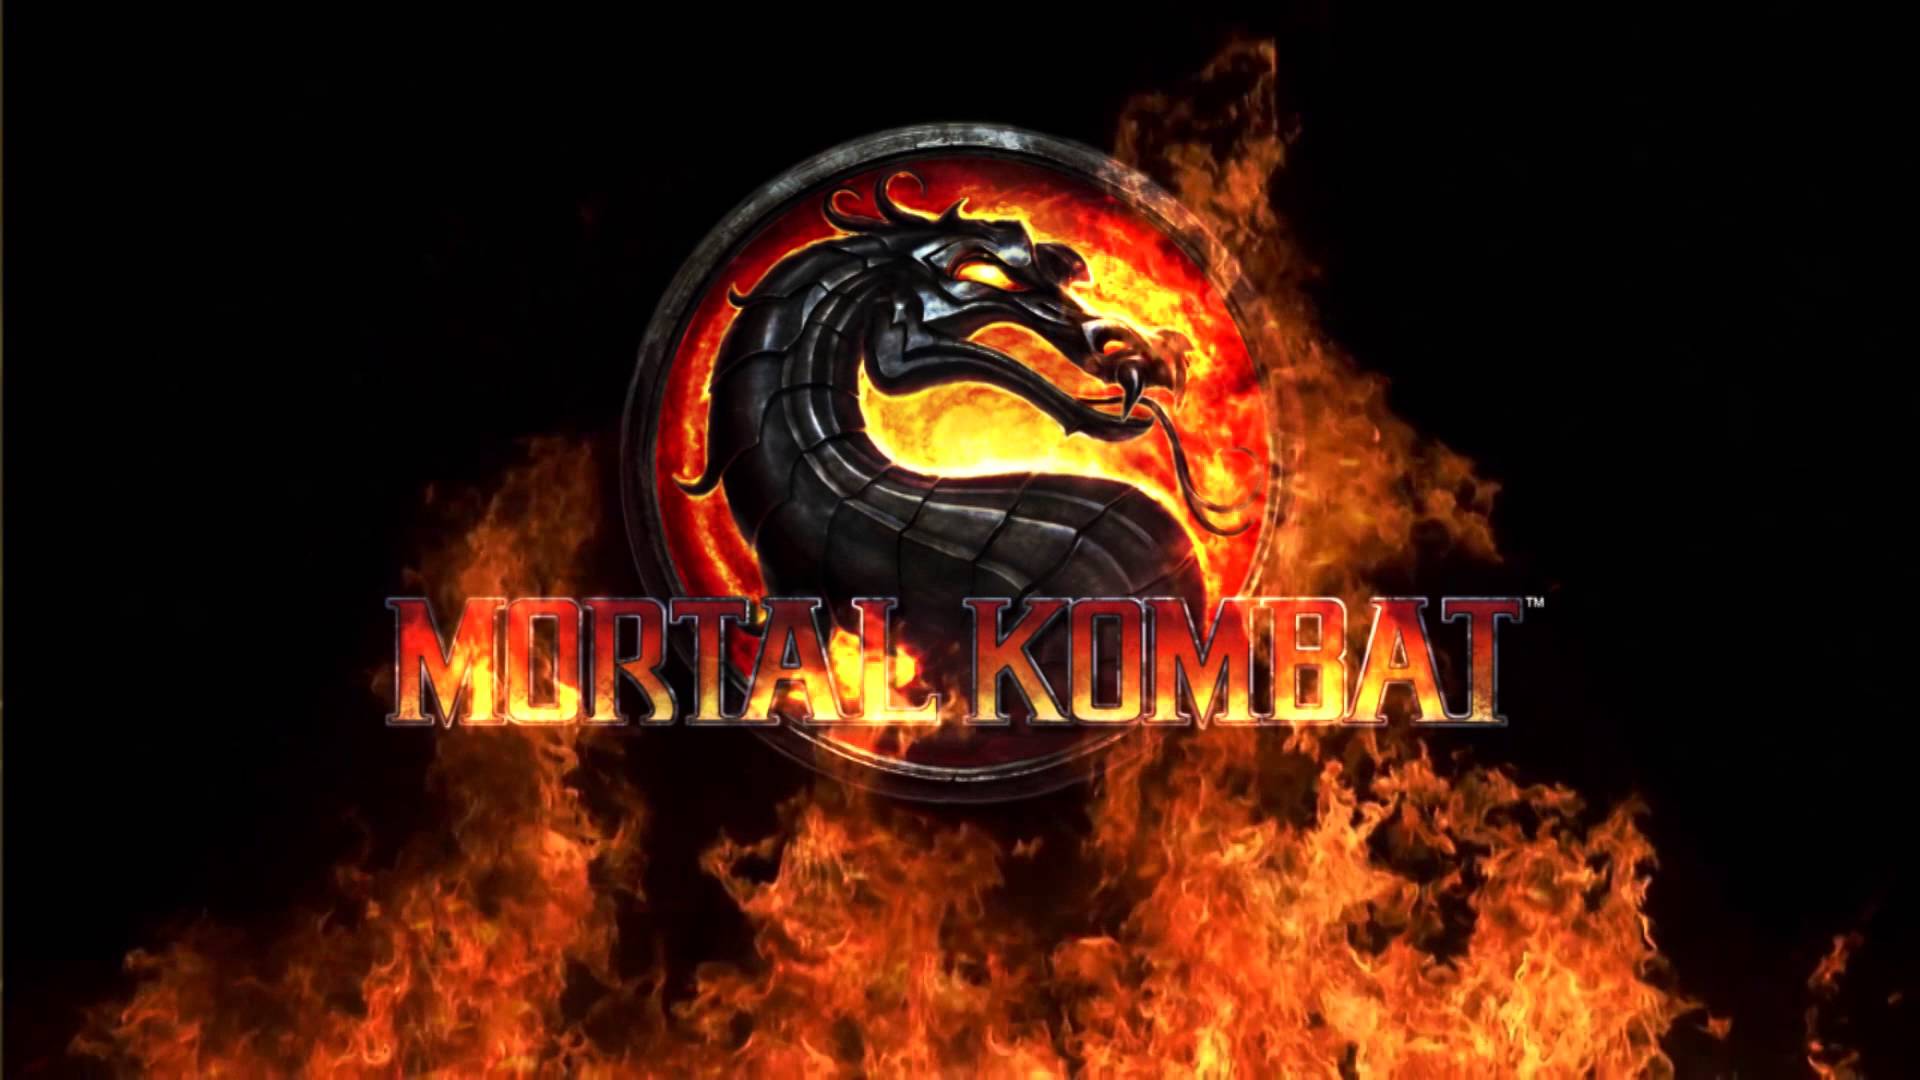 All Mortal Kombat Logo - Did You Spot the 'Mortal Kombat' Easter Eggs in the 'Ready Player